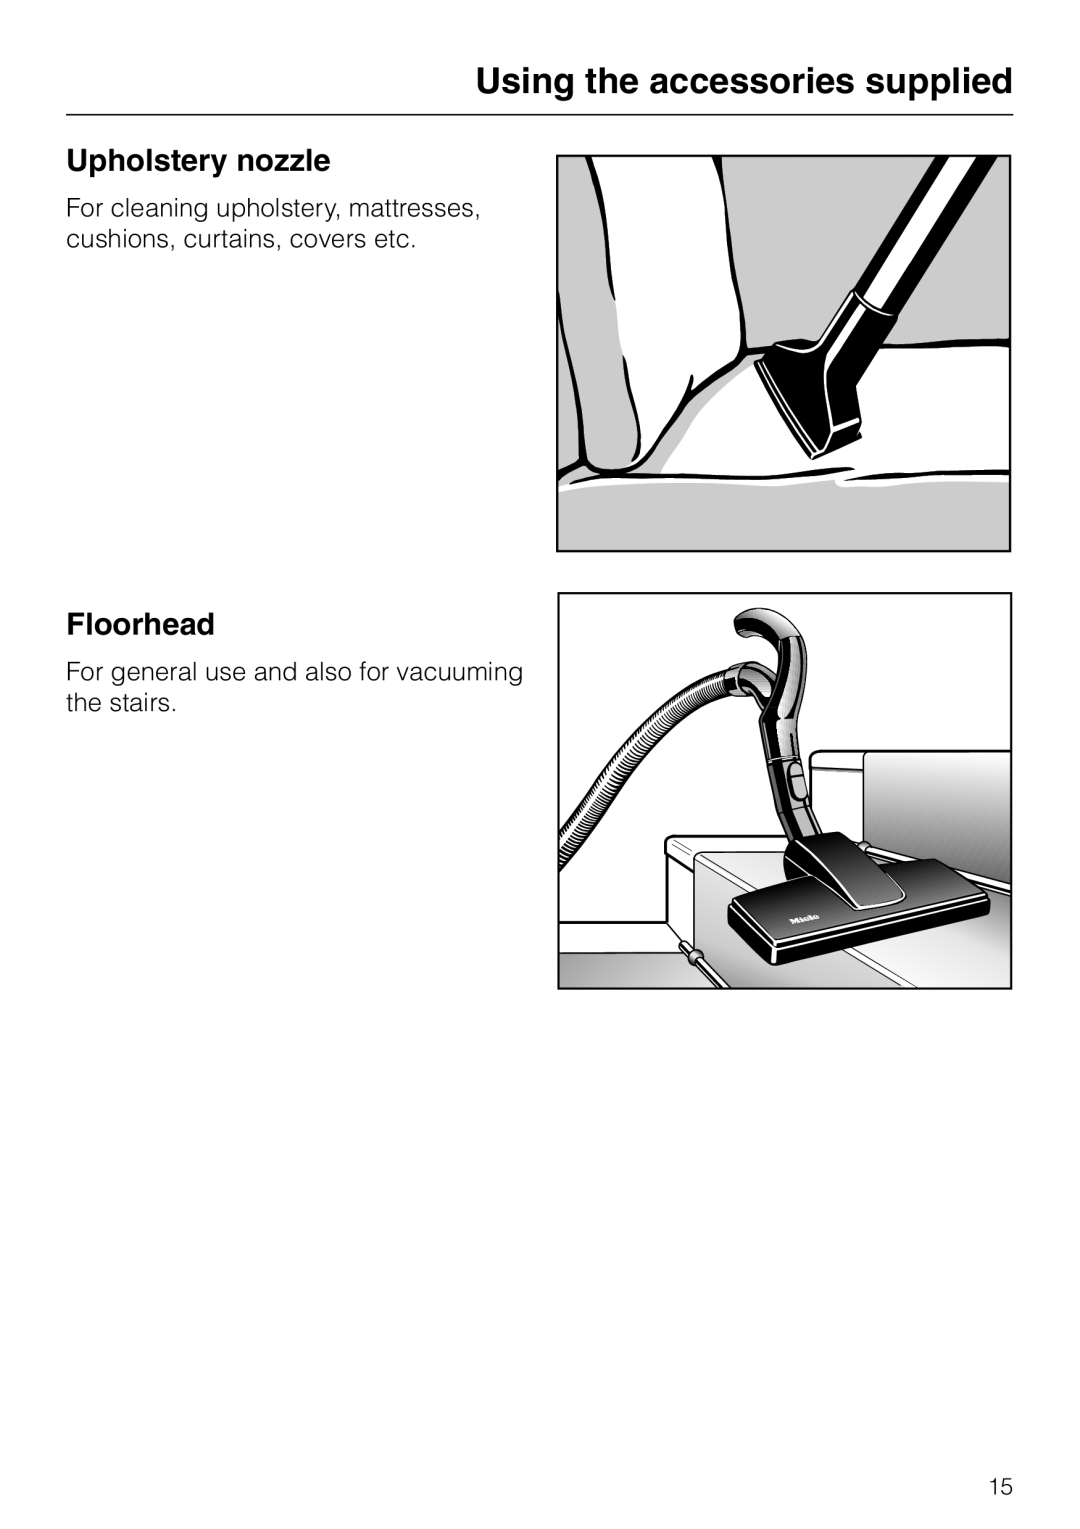 Miele S 5980 manual Upholstery nozzle, Floorhead, Using the accessories supplied 